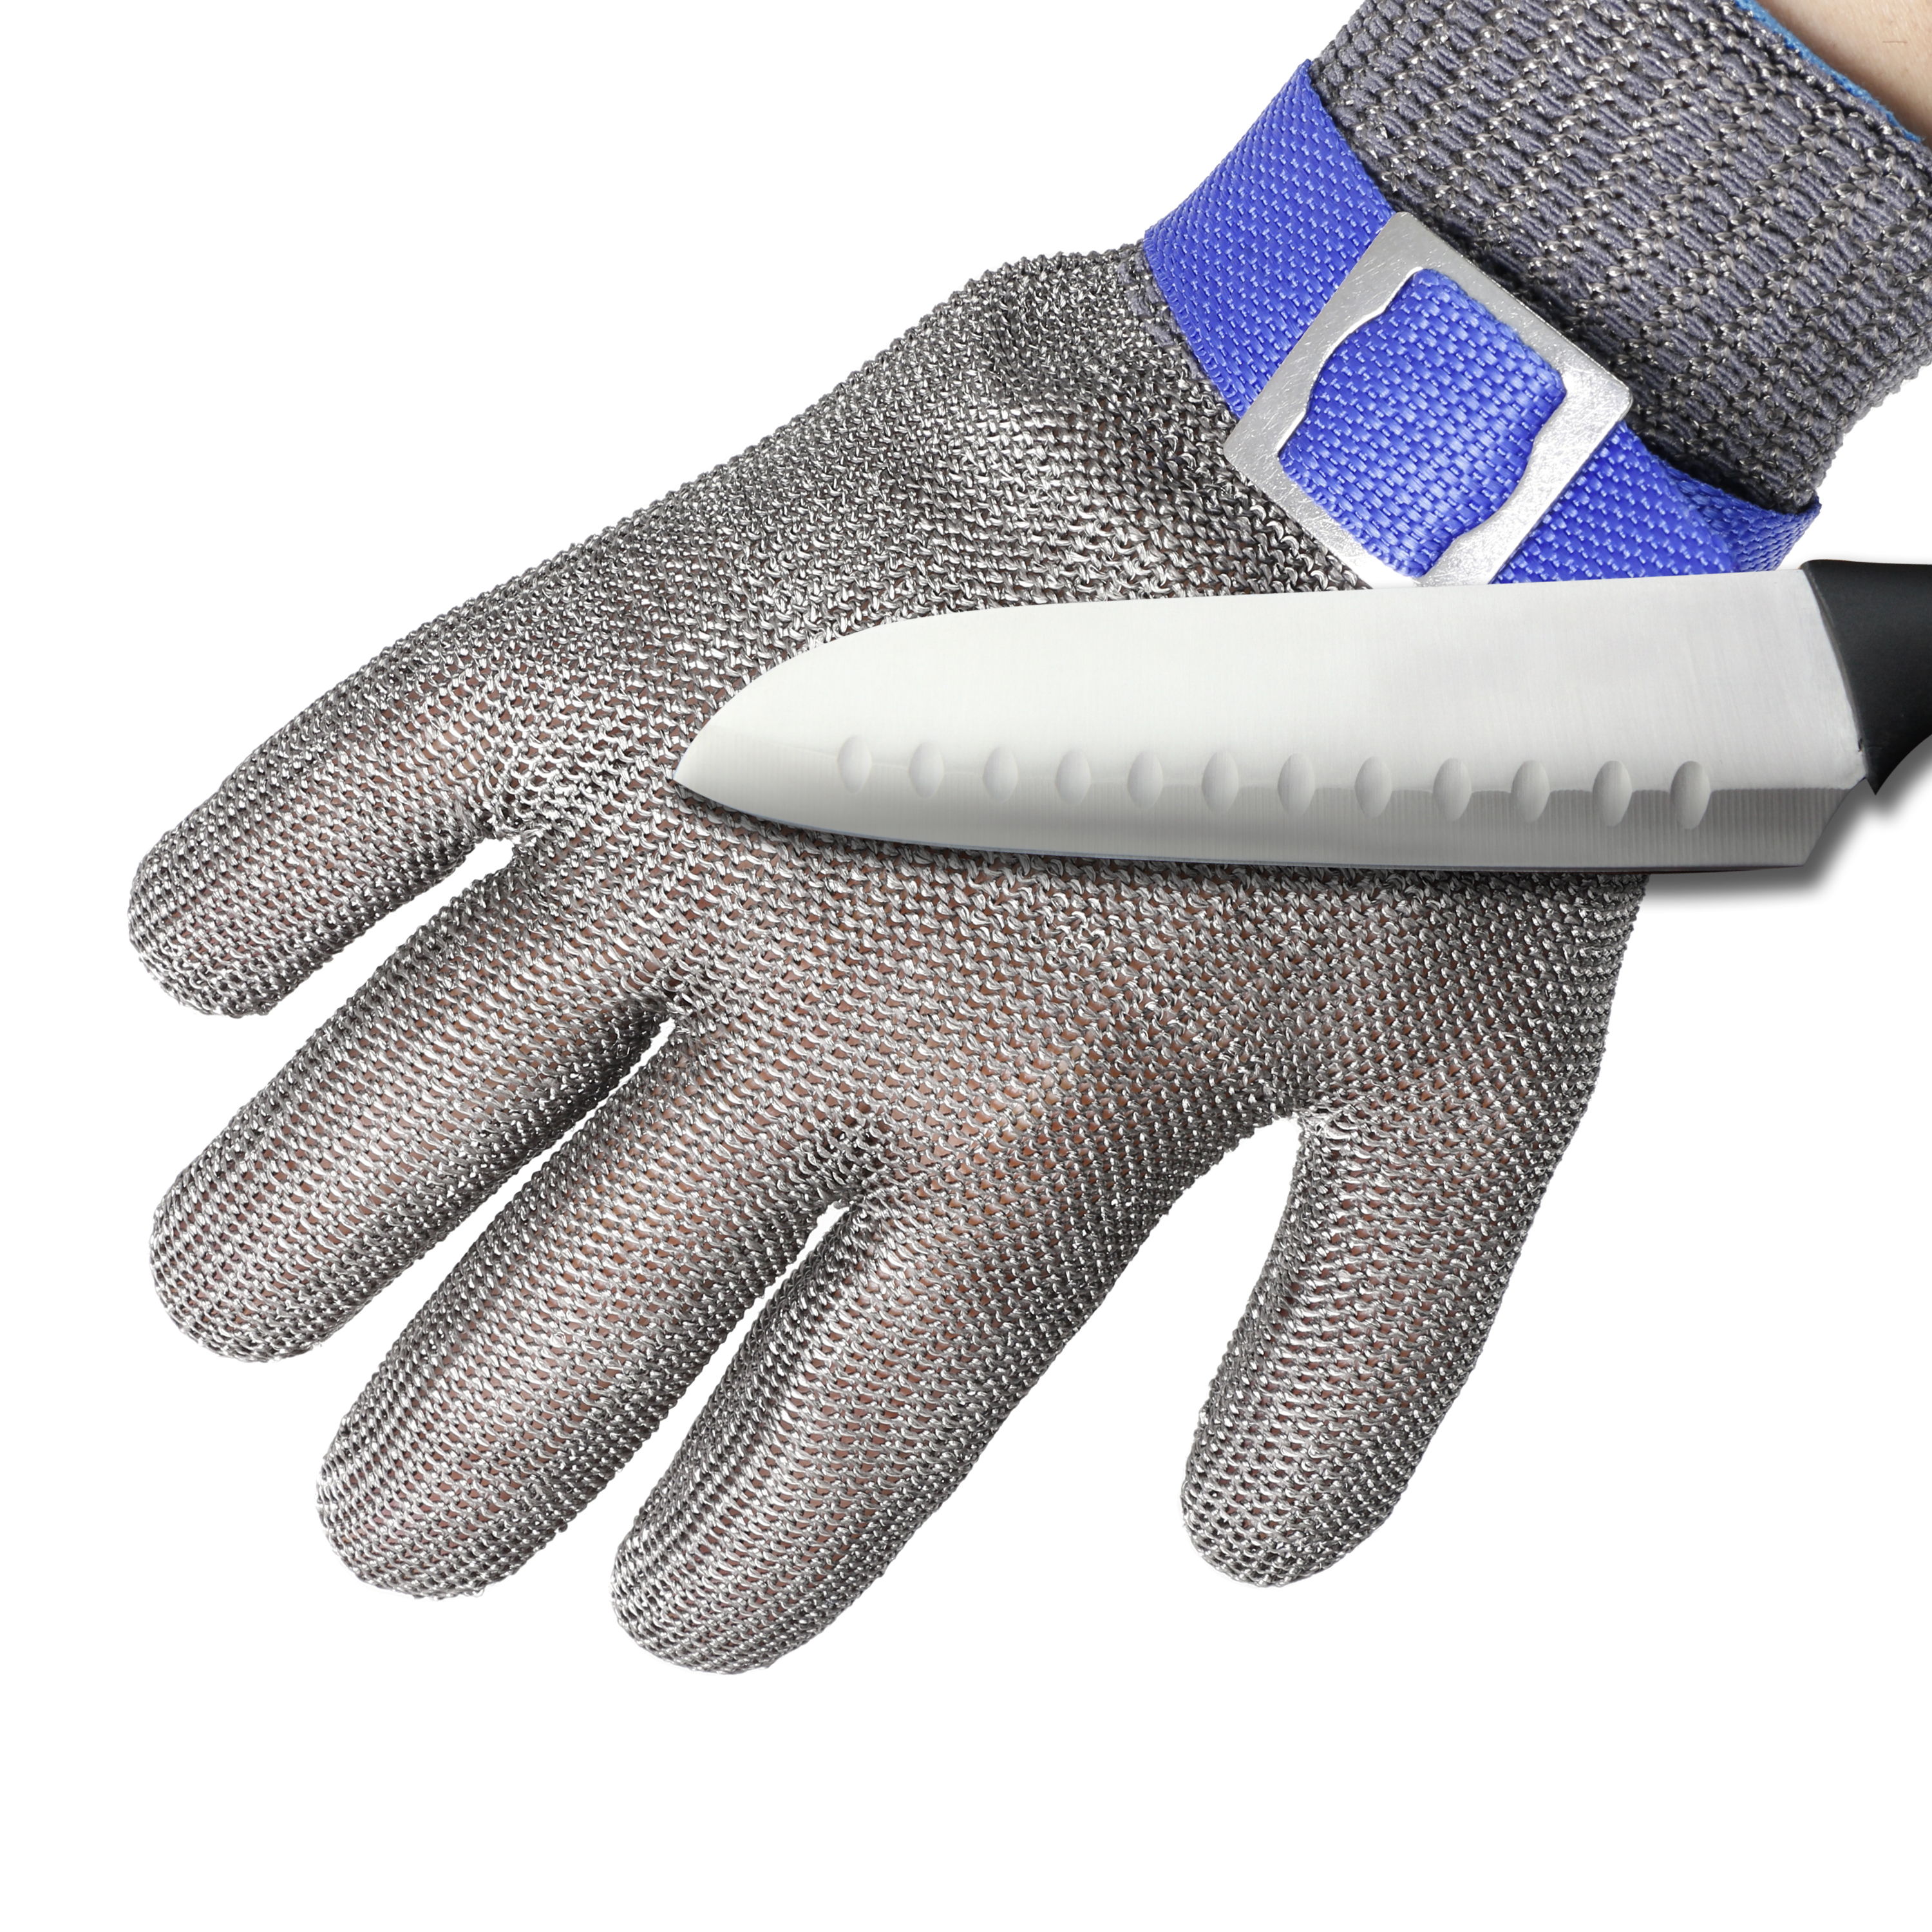 A Pair of Cut Resistant Safety Gloves for Sword Knife Maintenance